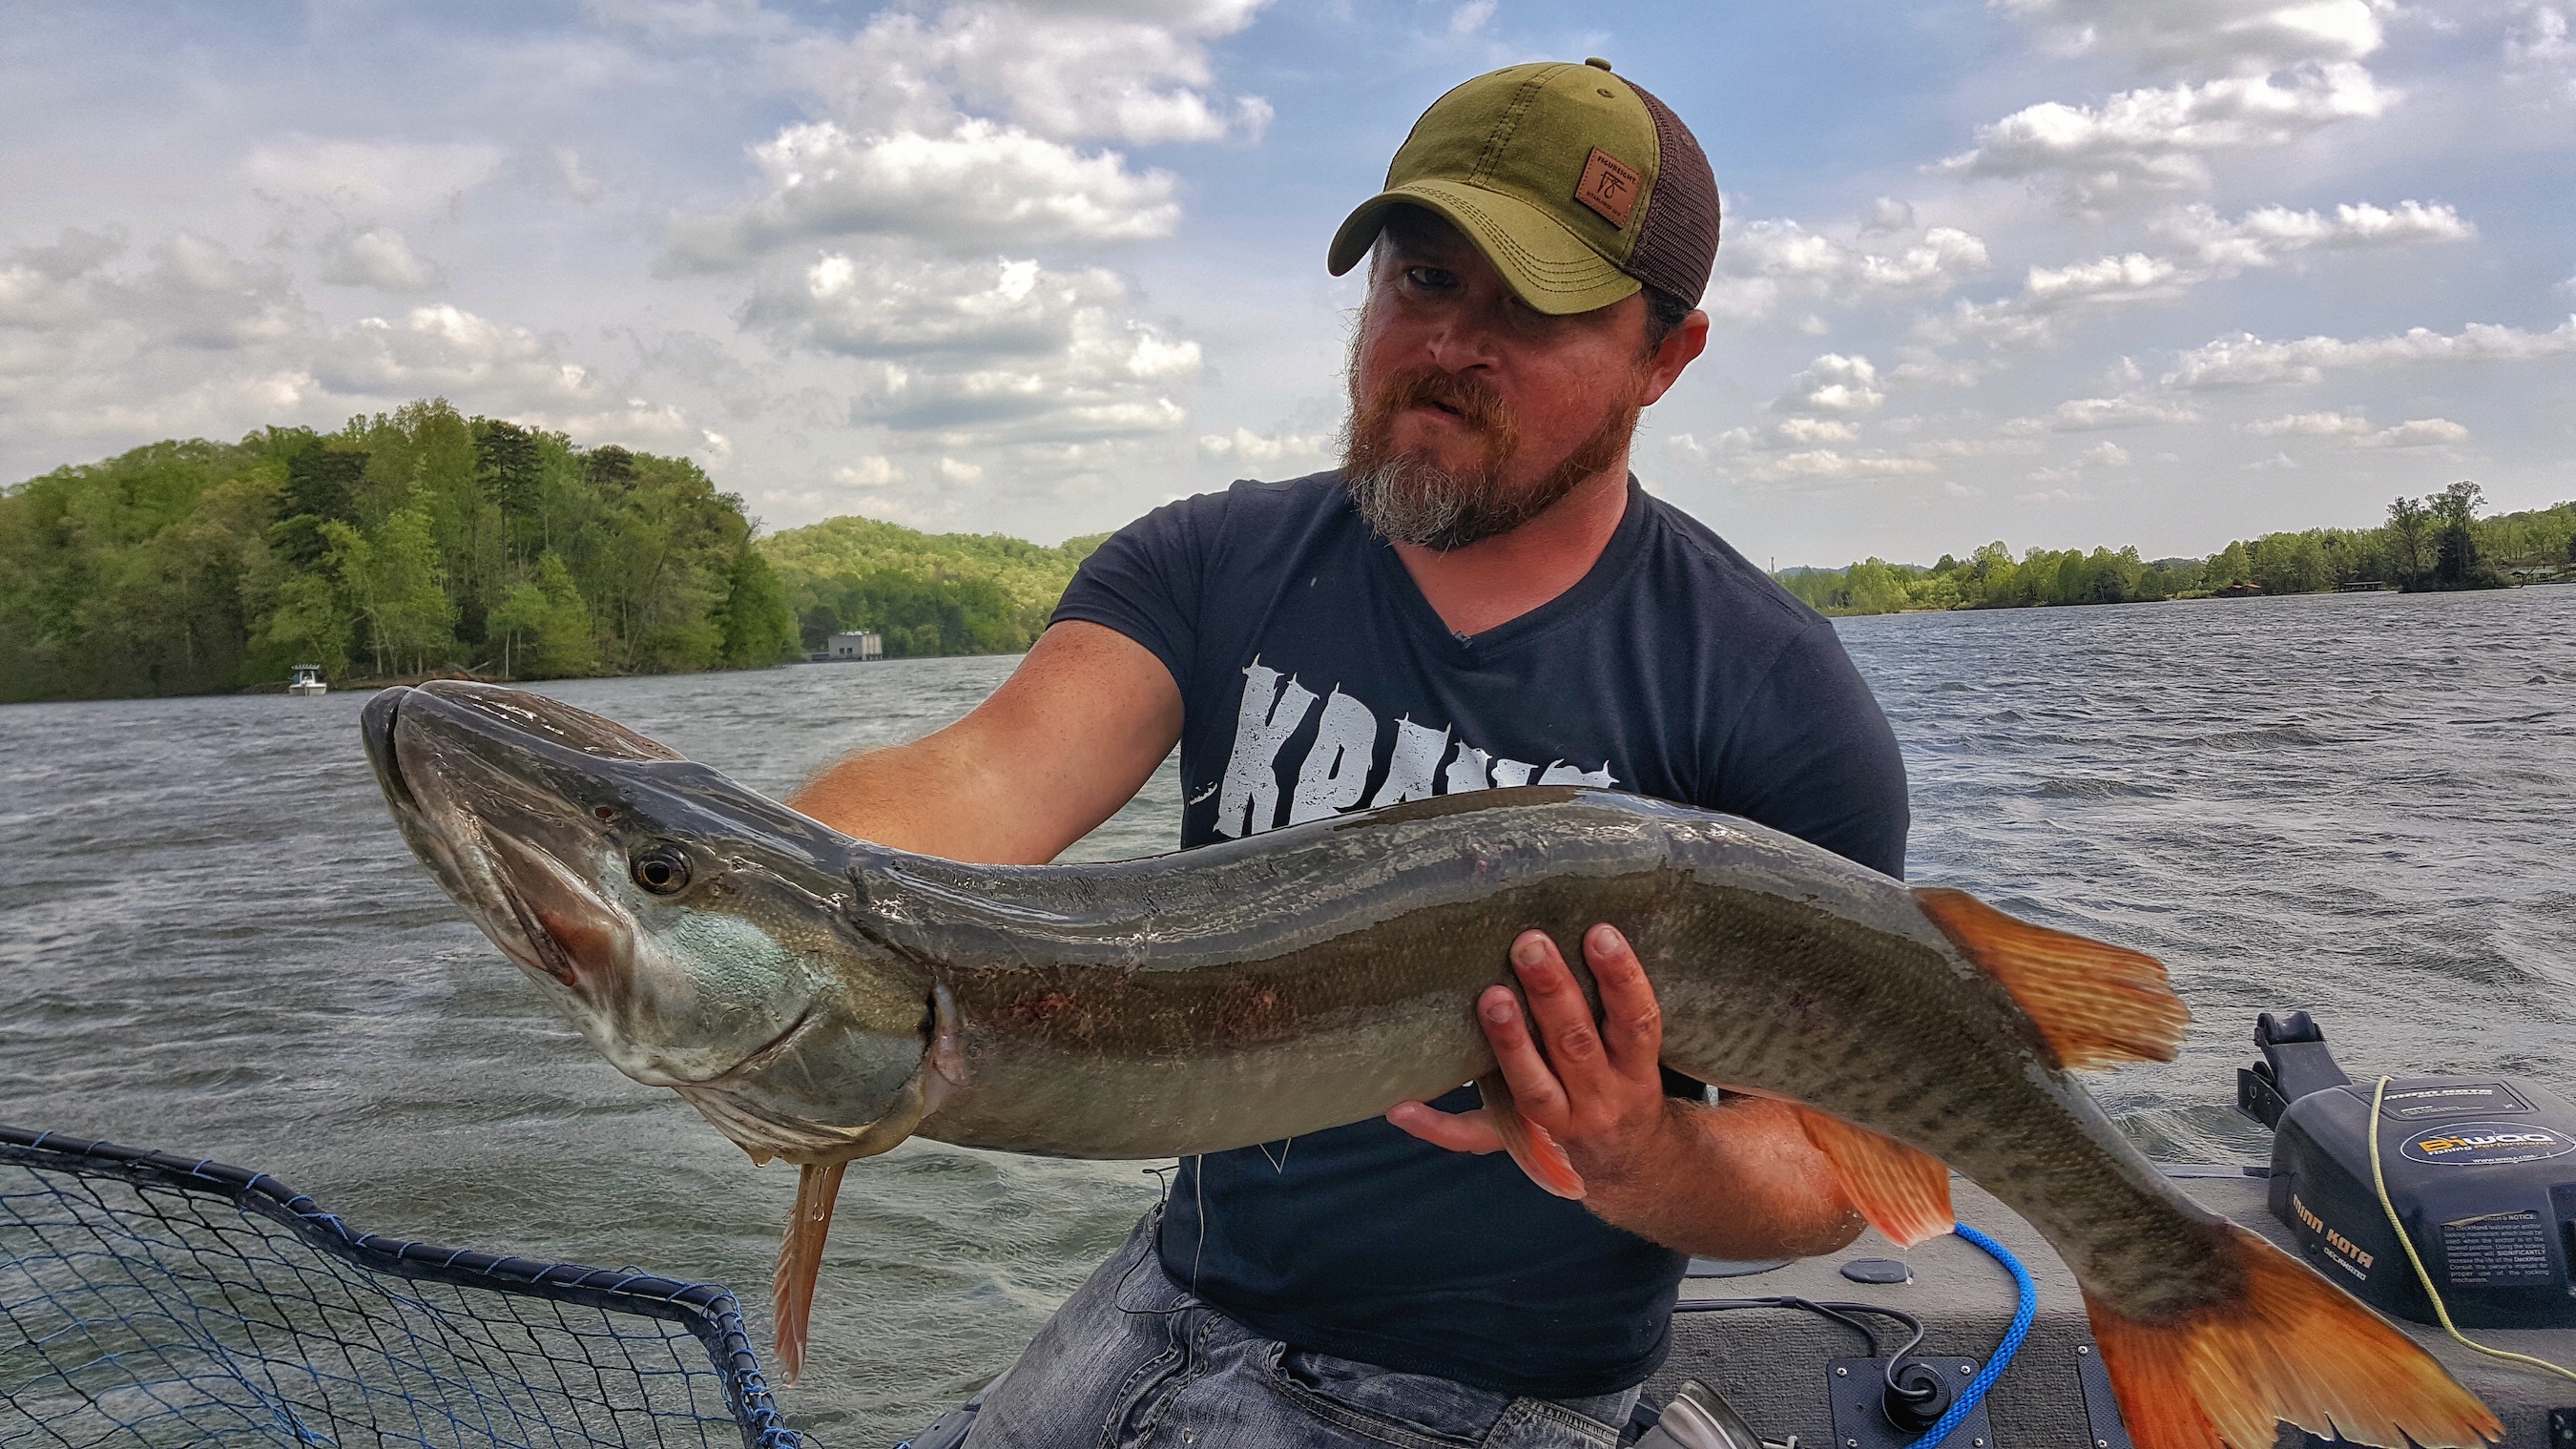 MUSKY FISHING WEED EDGES!! - Targeting Muskies with Rubber Baits 